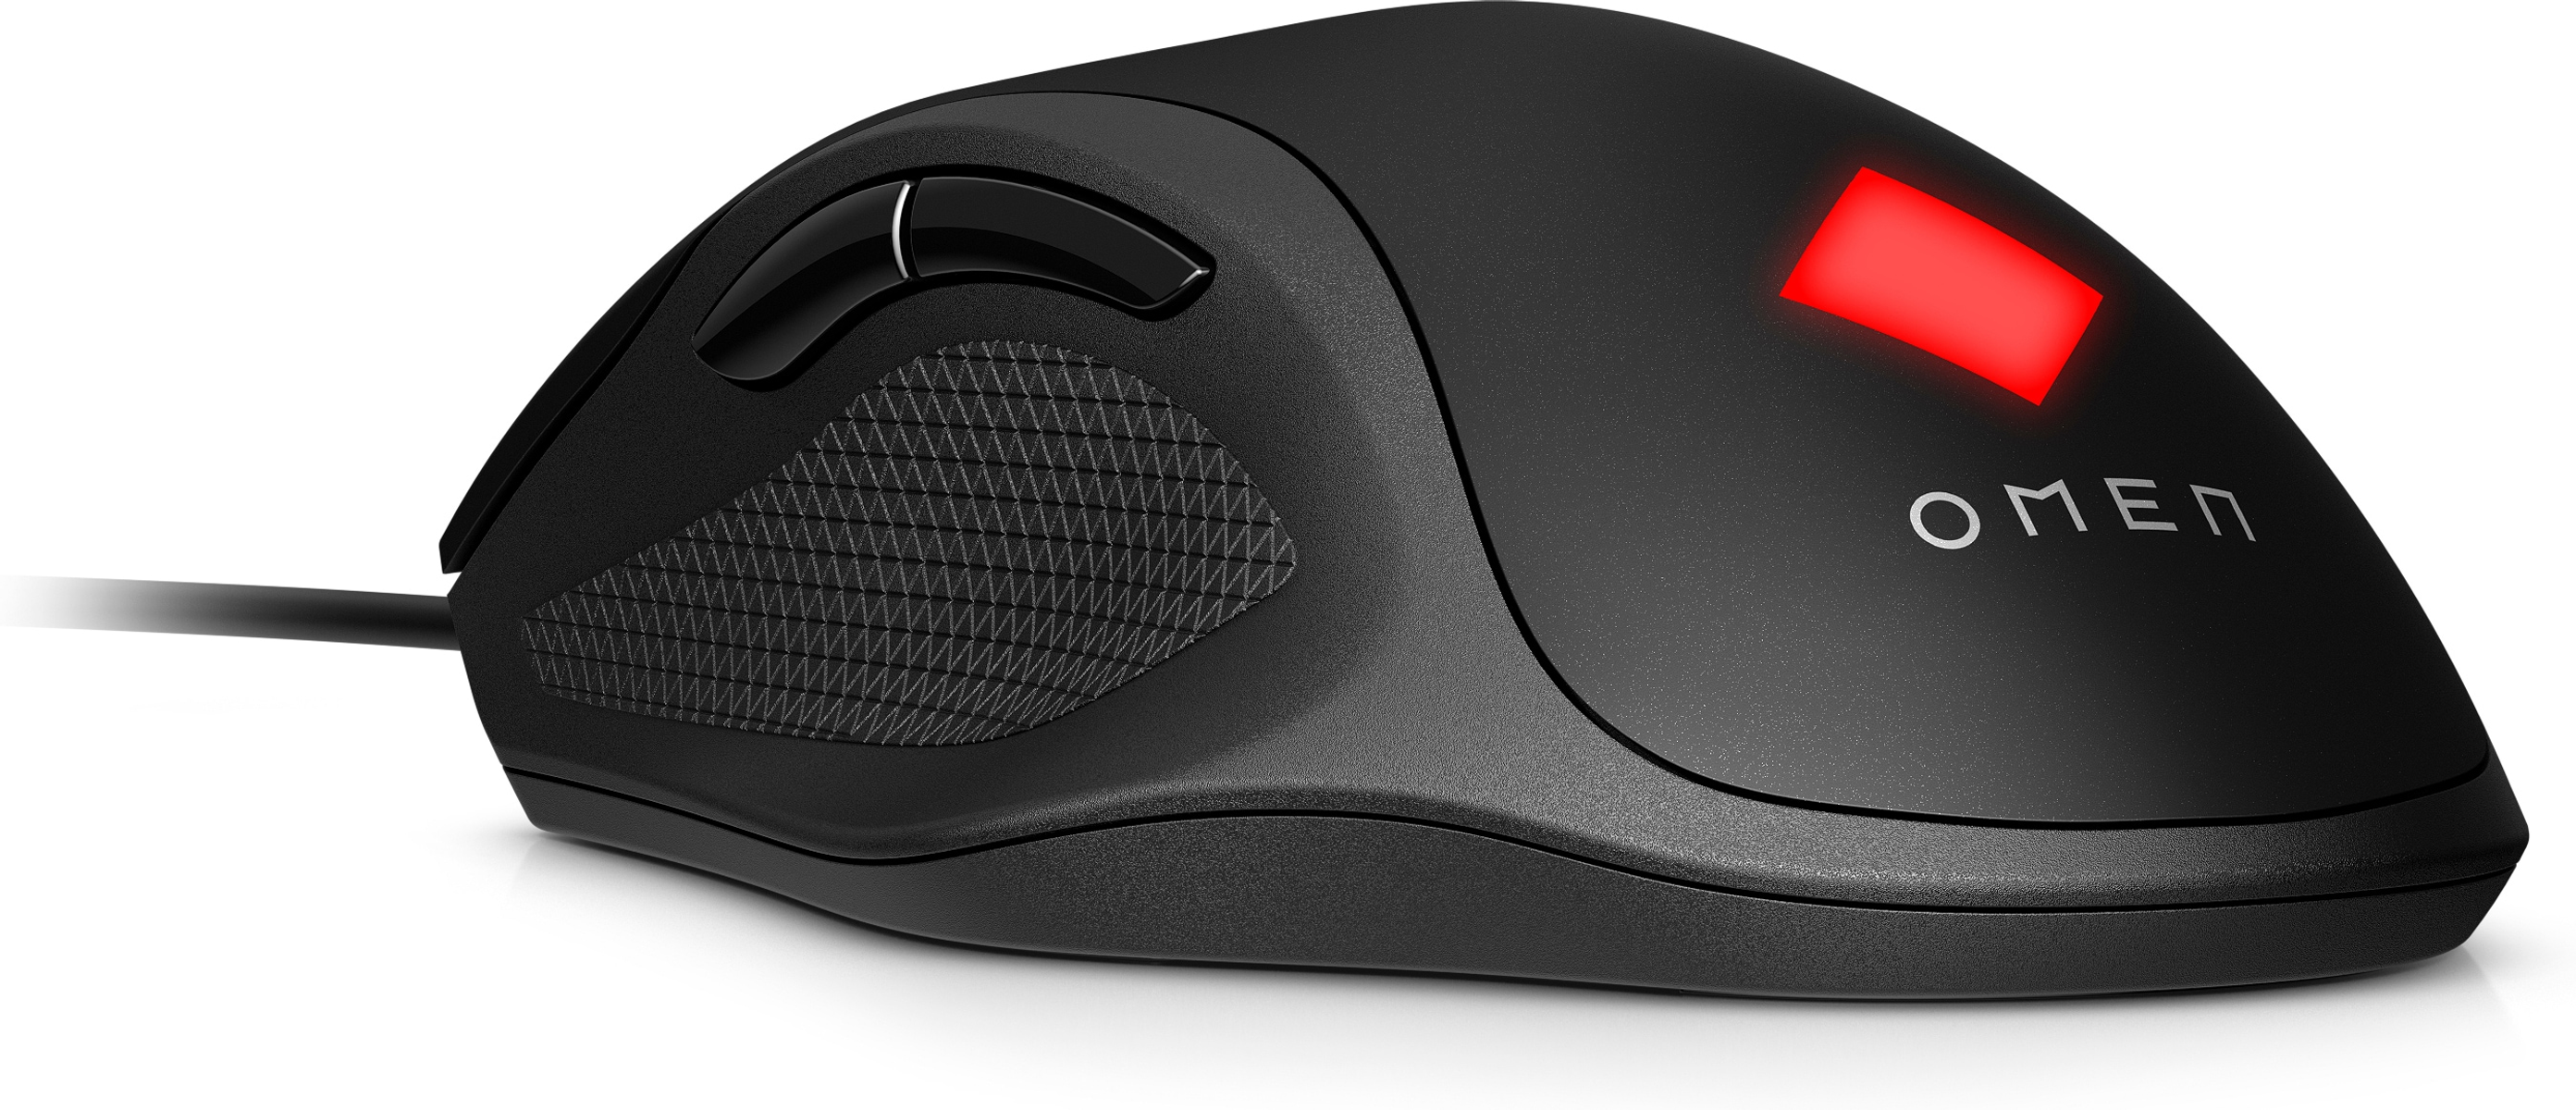 GAMING MOUSE OMEN ESSENTIAL VECTOR HP Schwarz 8BC52AA Gaming-Maus,